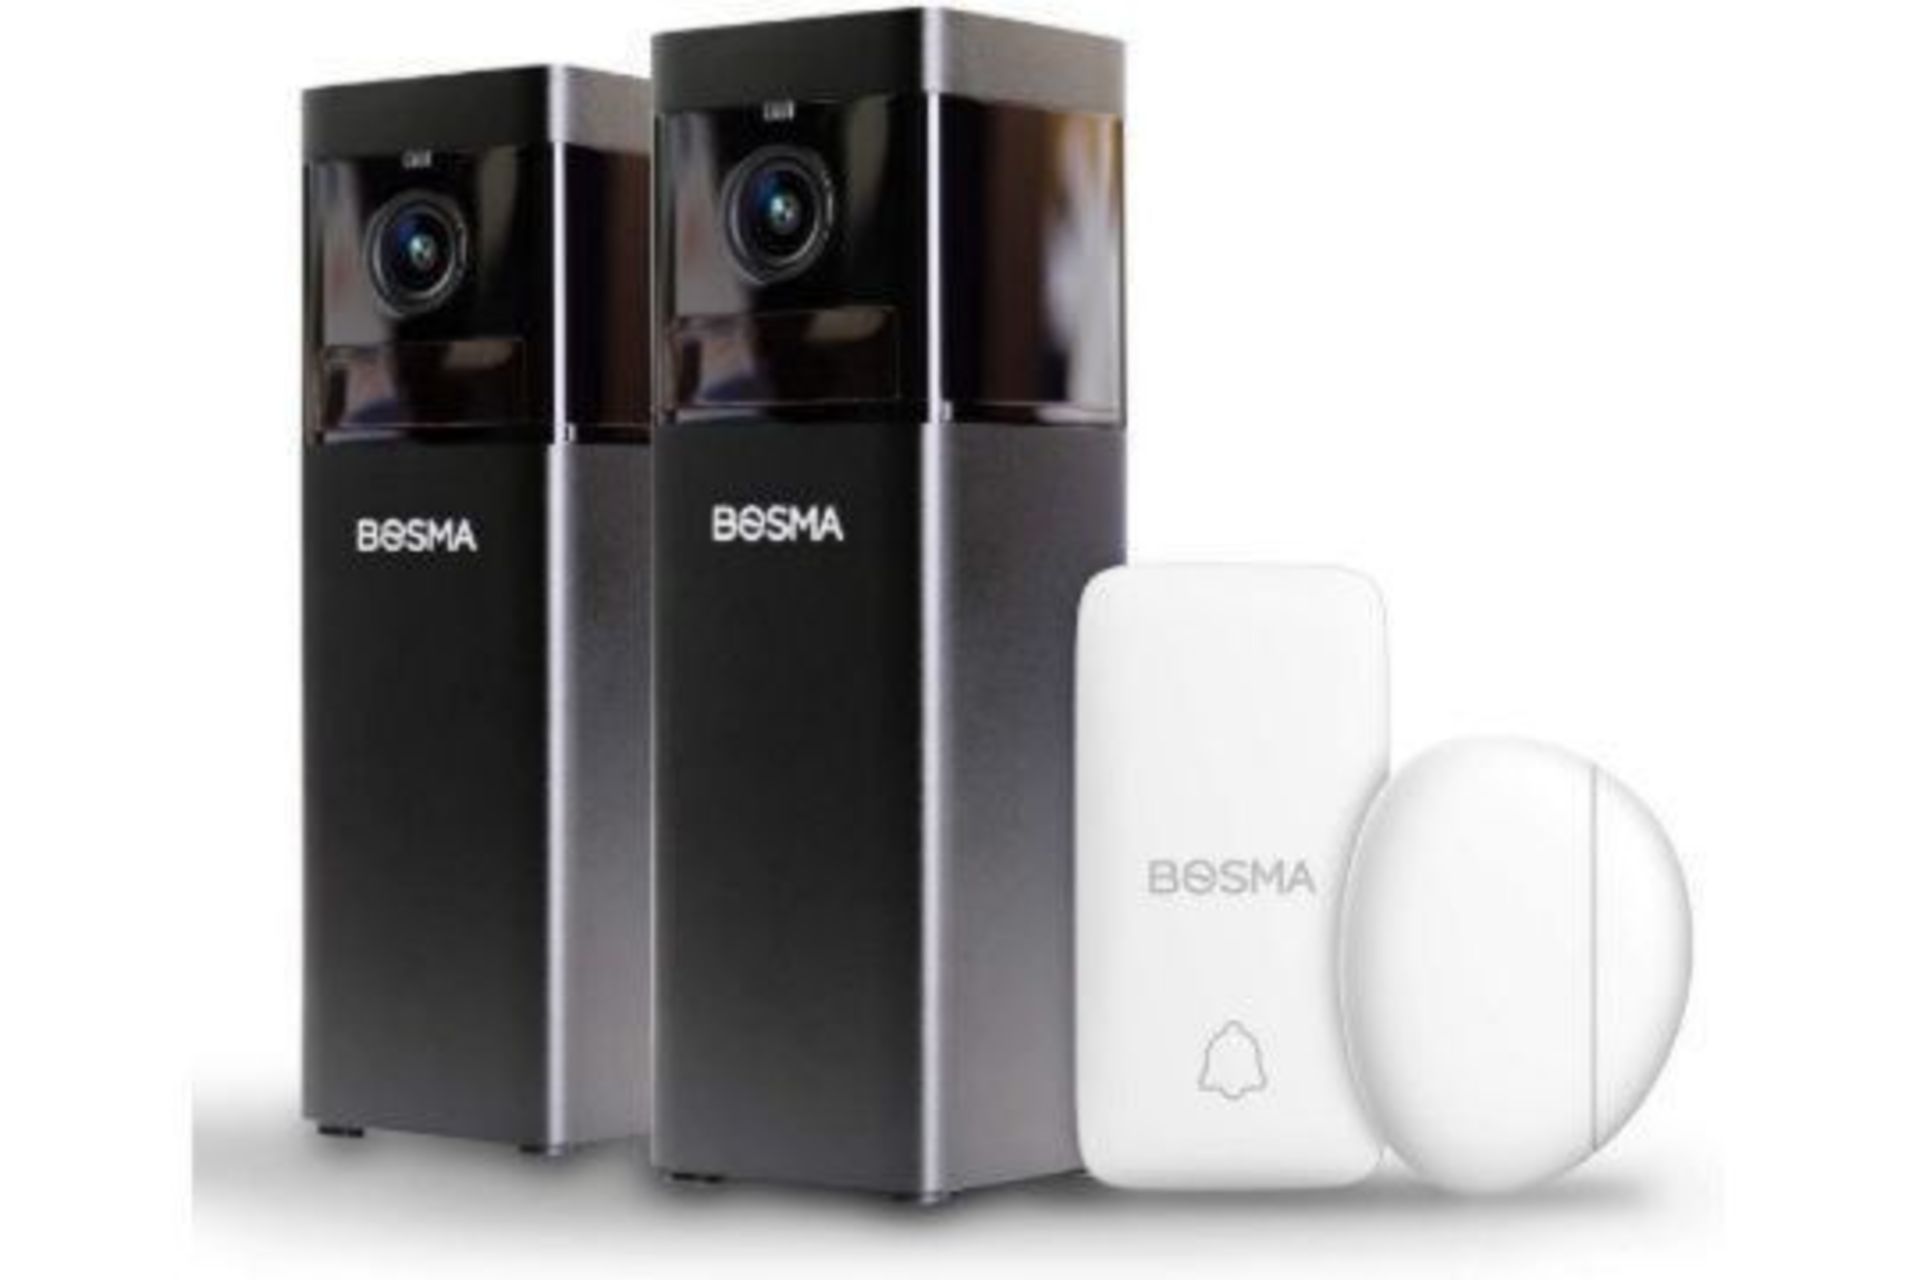 TRADE LOT 10 X BRAND NEW ASSORTED BOSMA SECURITY CAMERAS WITH ACCESSORIES RRP £119 EACH